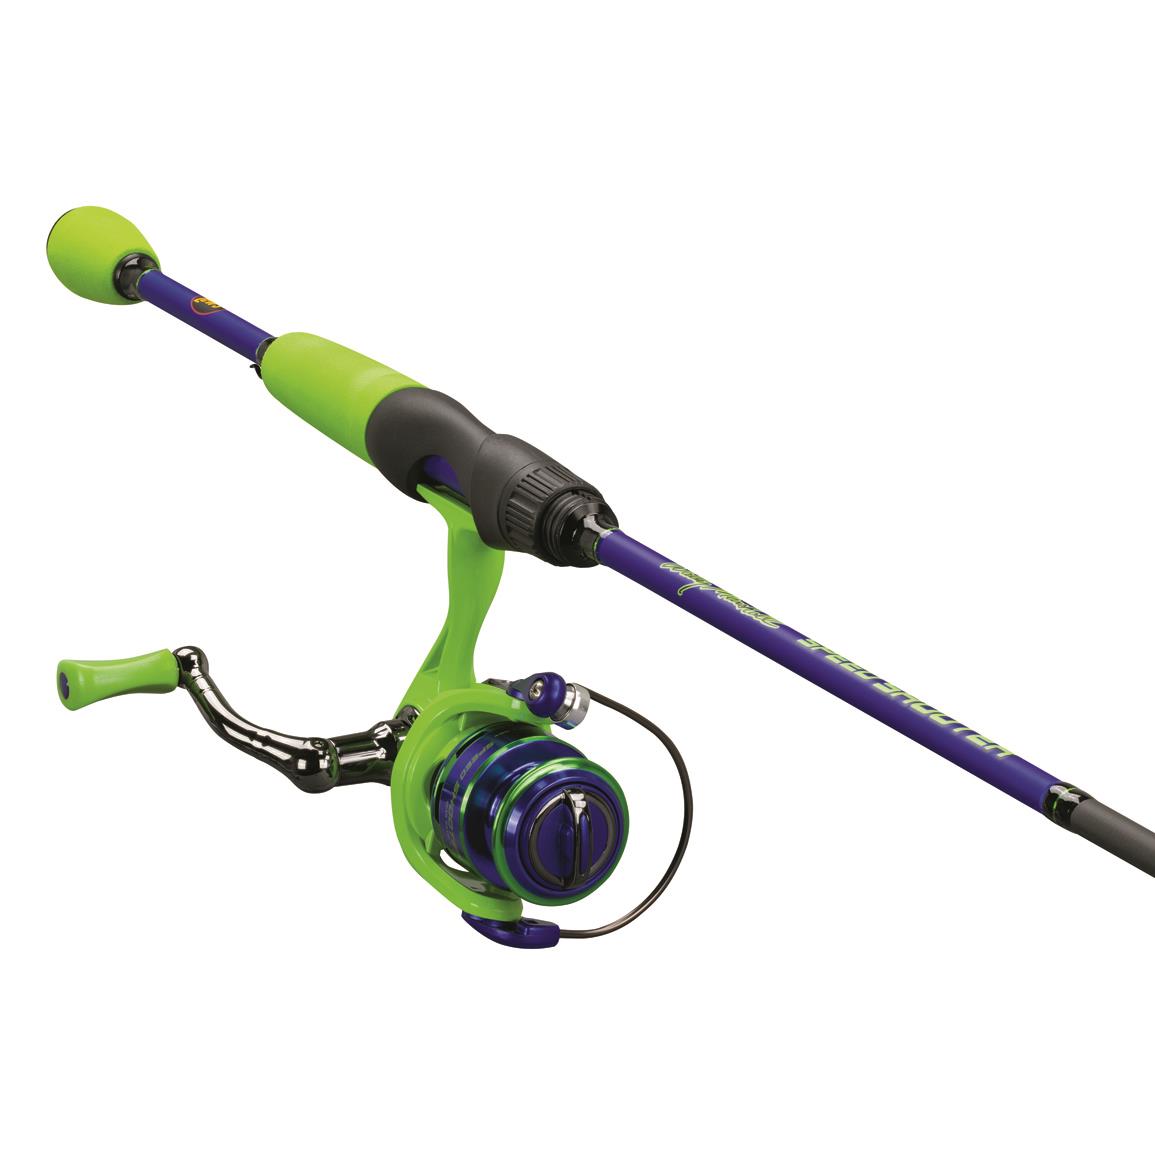 Zebco / Quantum Crappie Fighter Spinning Combo 12' Length, 2 Piece Rod,  4.3:1 Gear Ratio, 1 Bearings, Ambidextrous